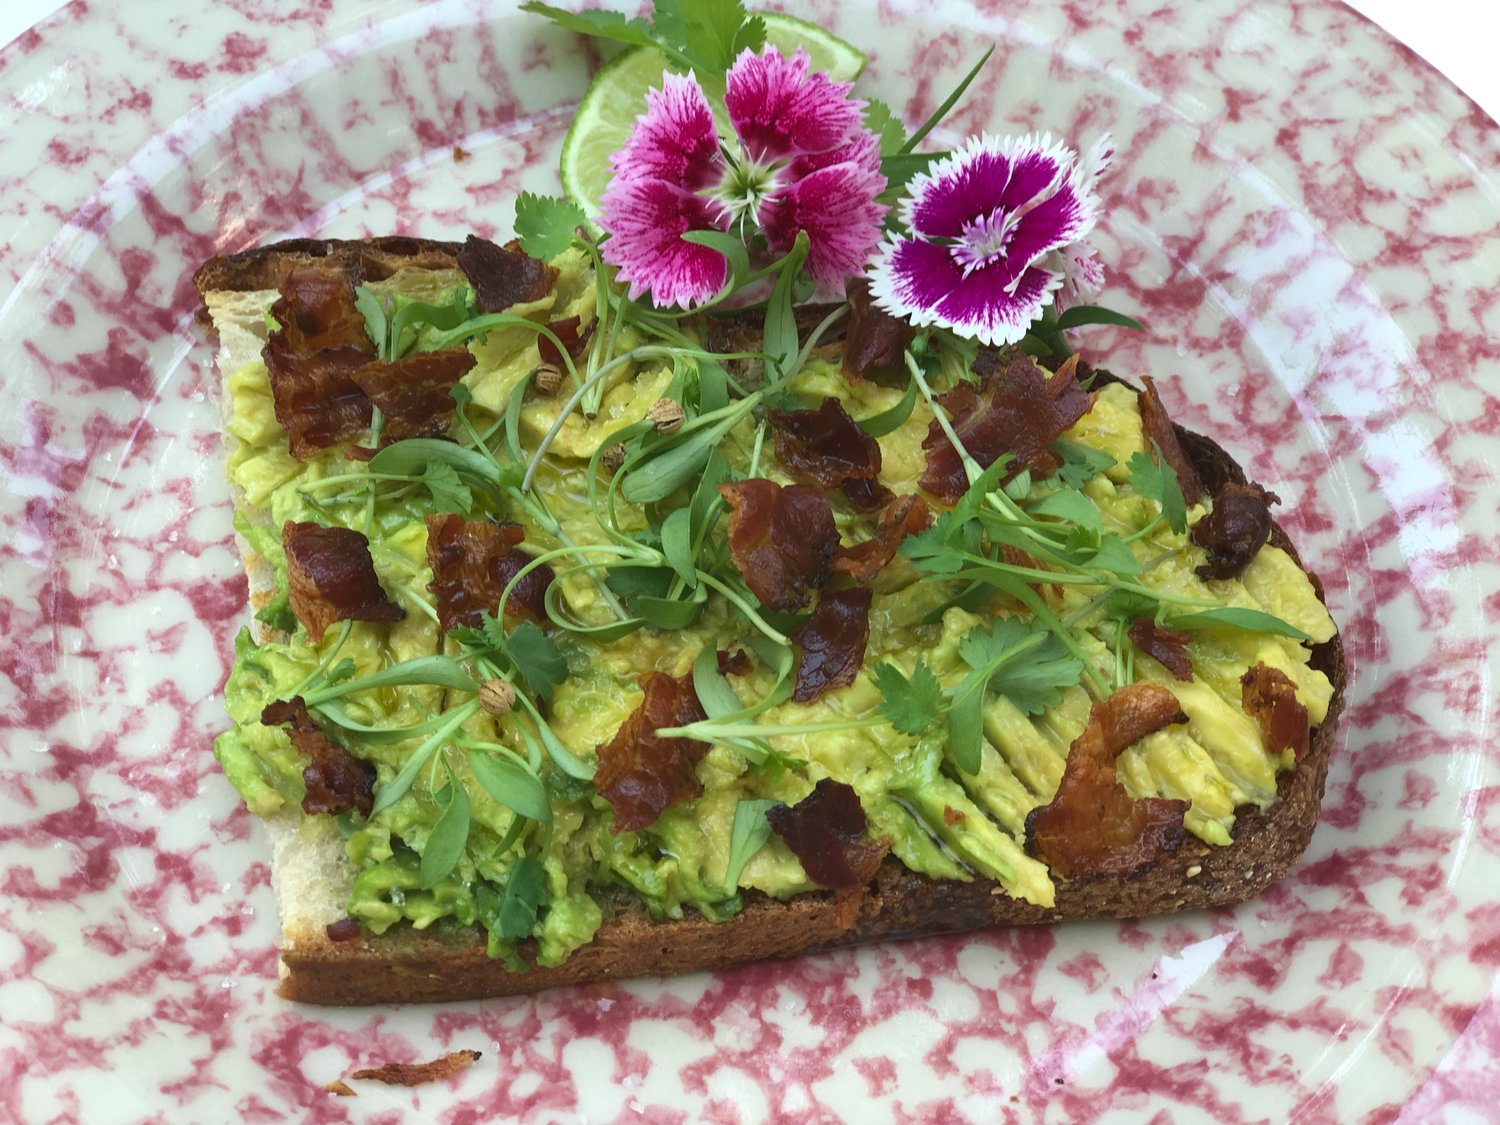 Crispy pancetta adds texture and a salty zing to this avocado toast with cilantro shoots on artisan bread.